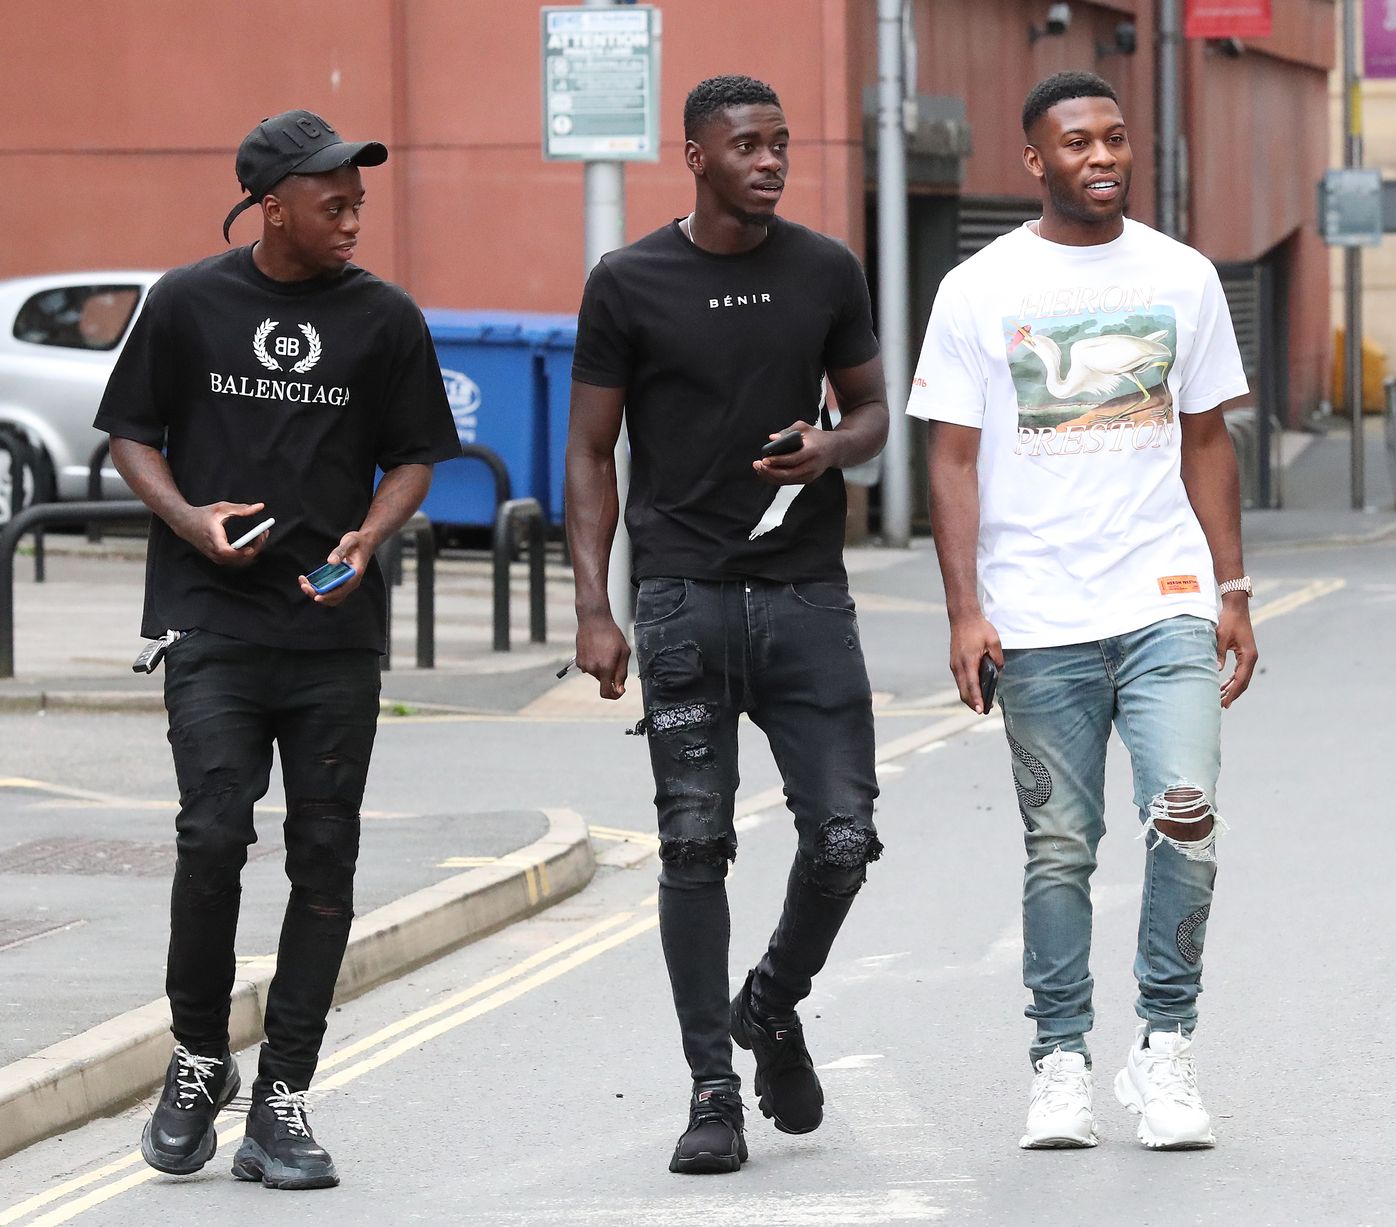 Manchester United players meet for team bonding meal in city centre - Bóng Đá